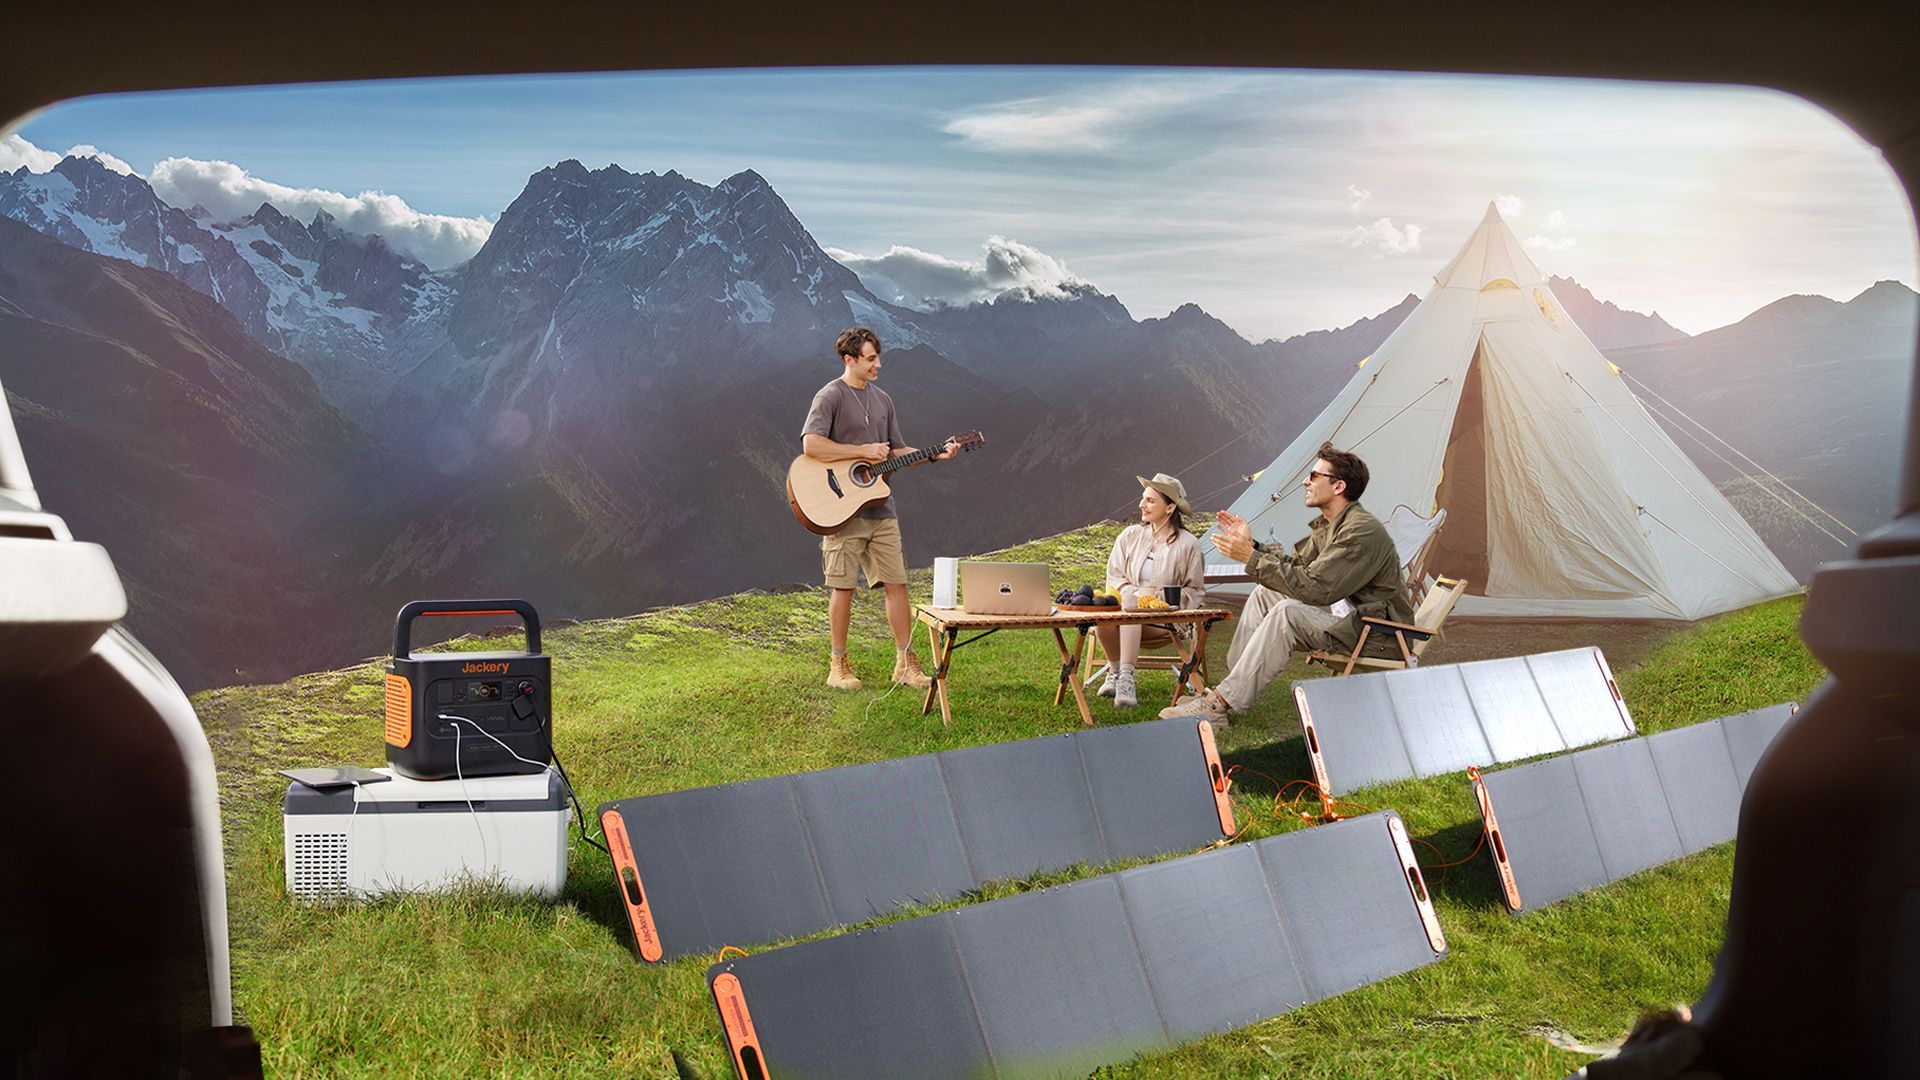 The speed of sunlight: New Jackery Solar Generator 1000 Pro enables fast solar charging photo 7